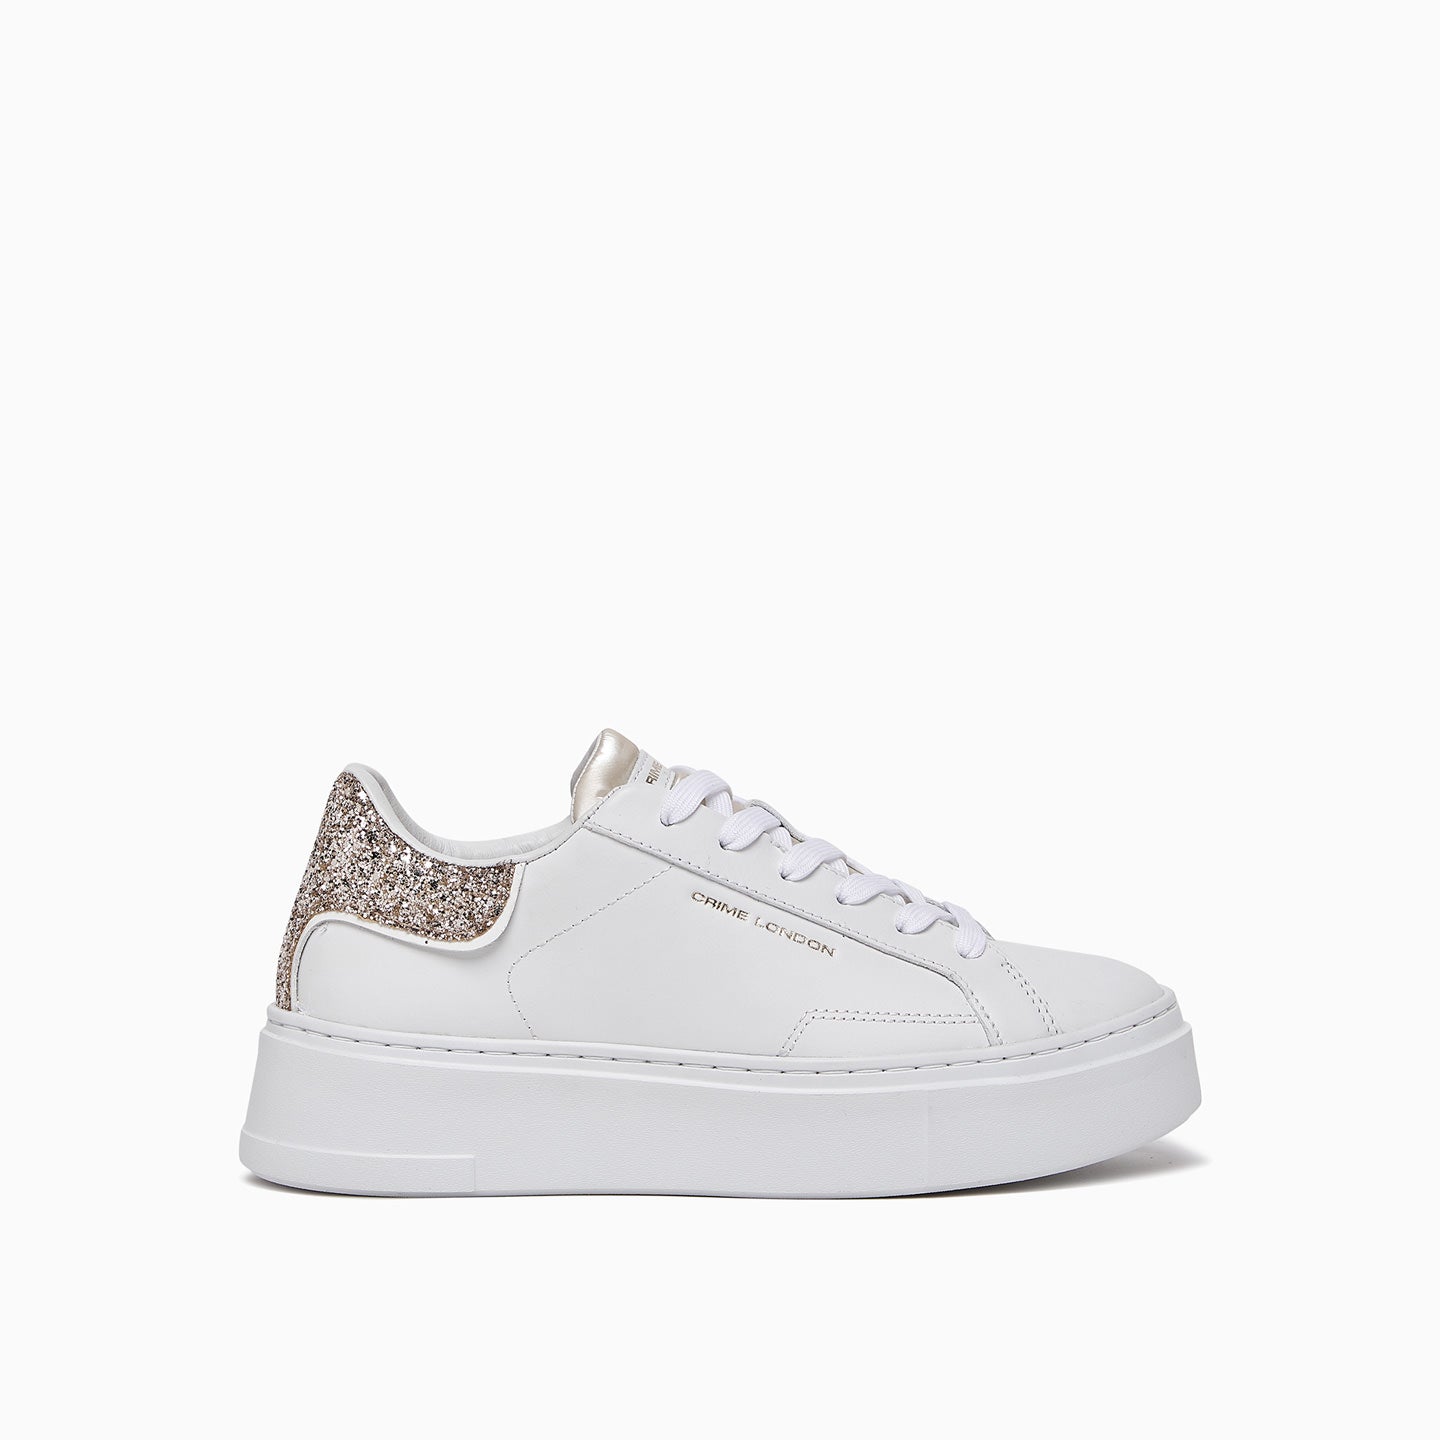 Sneakers Donna - EXTRALIGHT 2.0 TOP ORO - Crime London